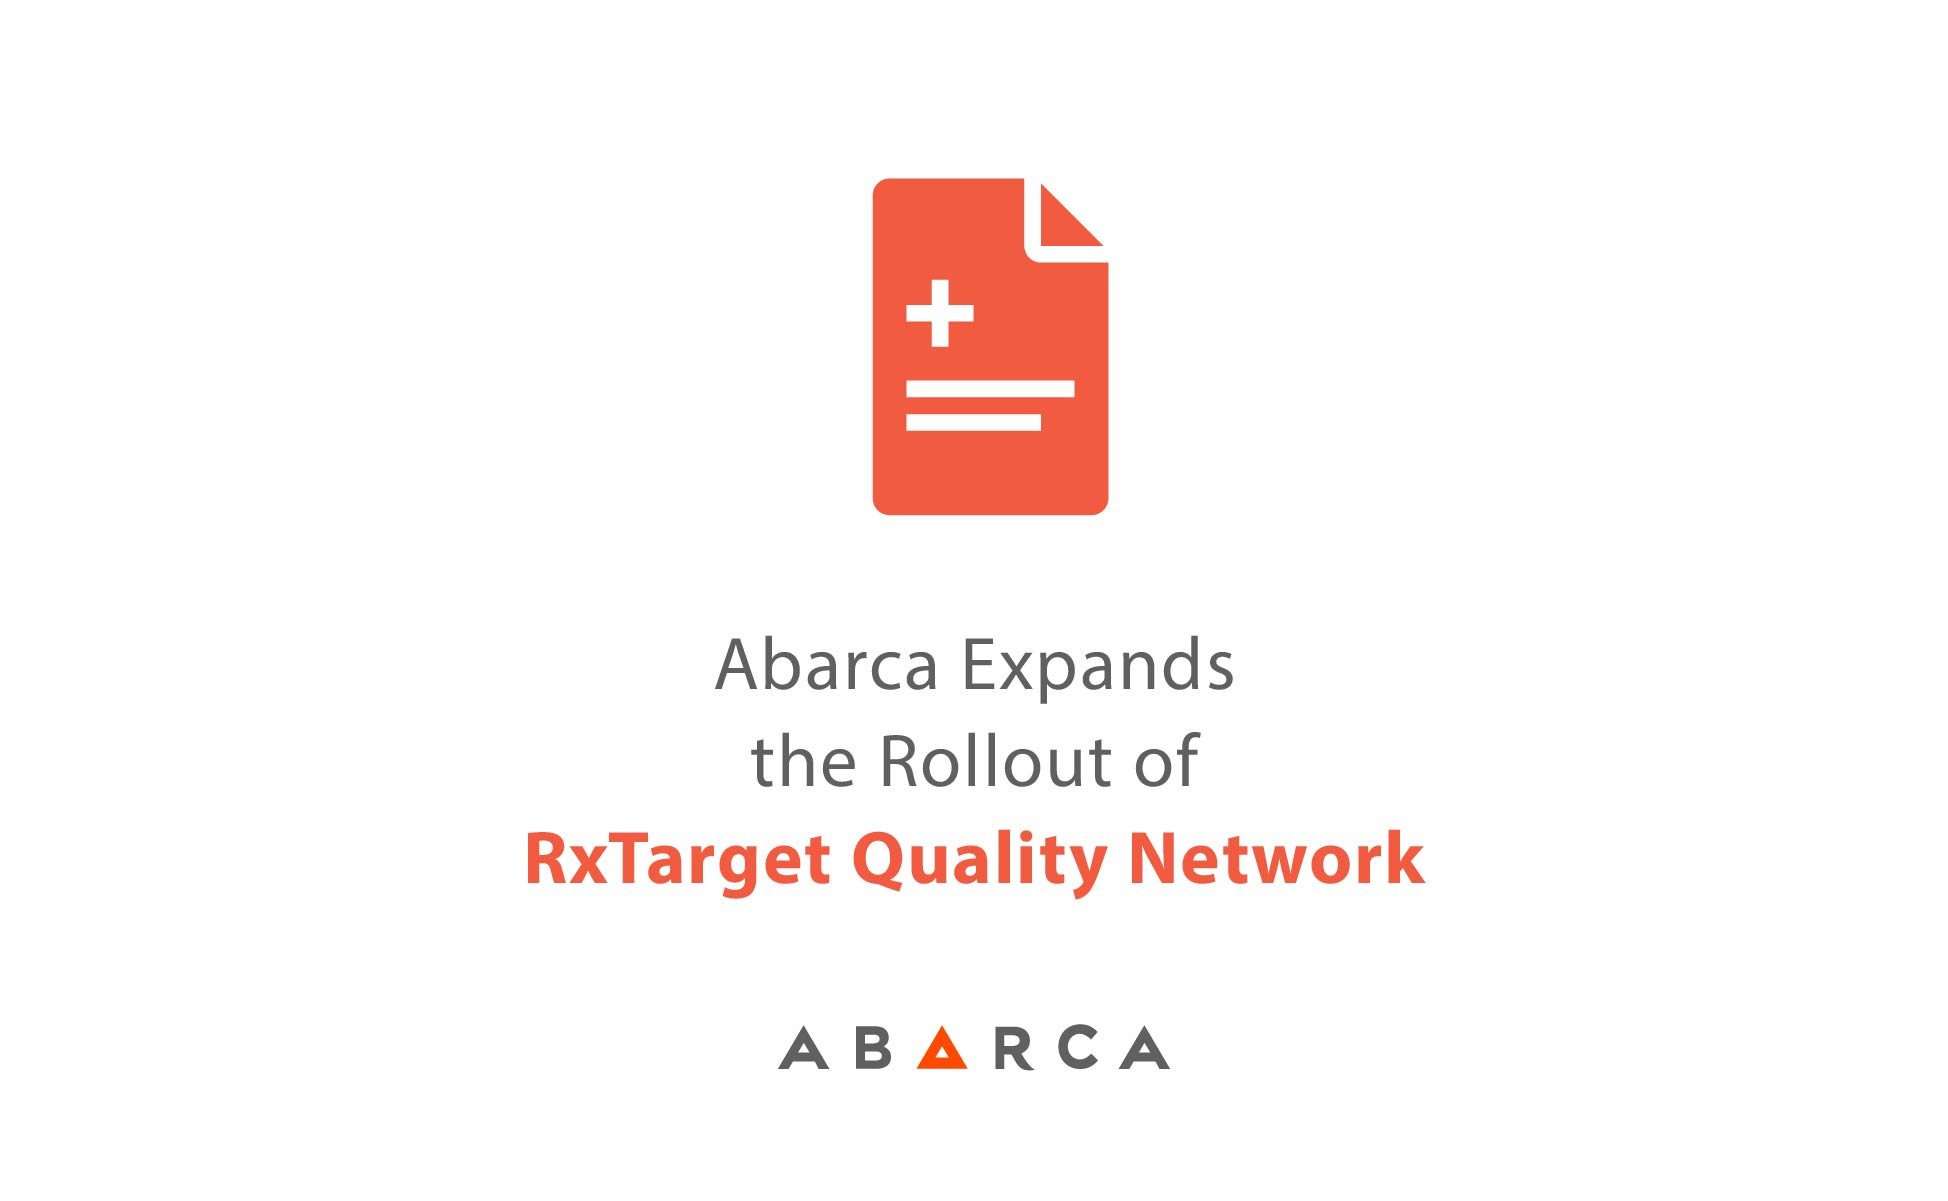 Abarca Health expands the rollout of RxTarget quality network